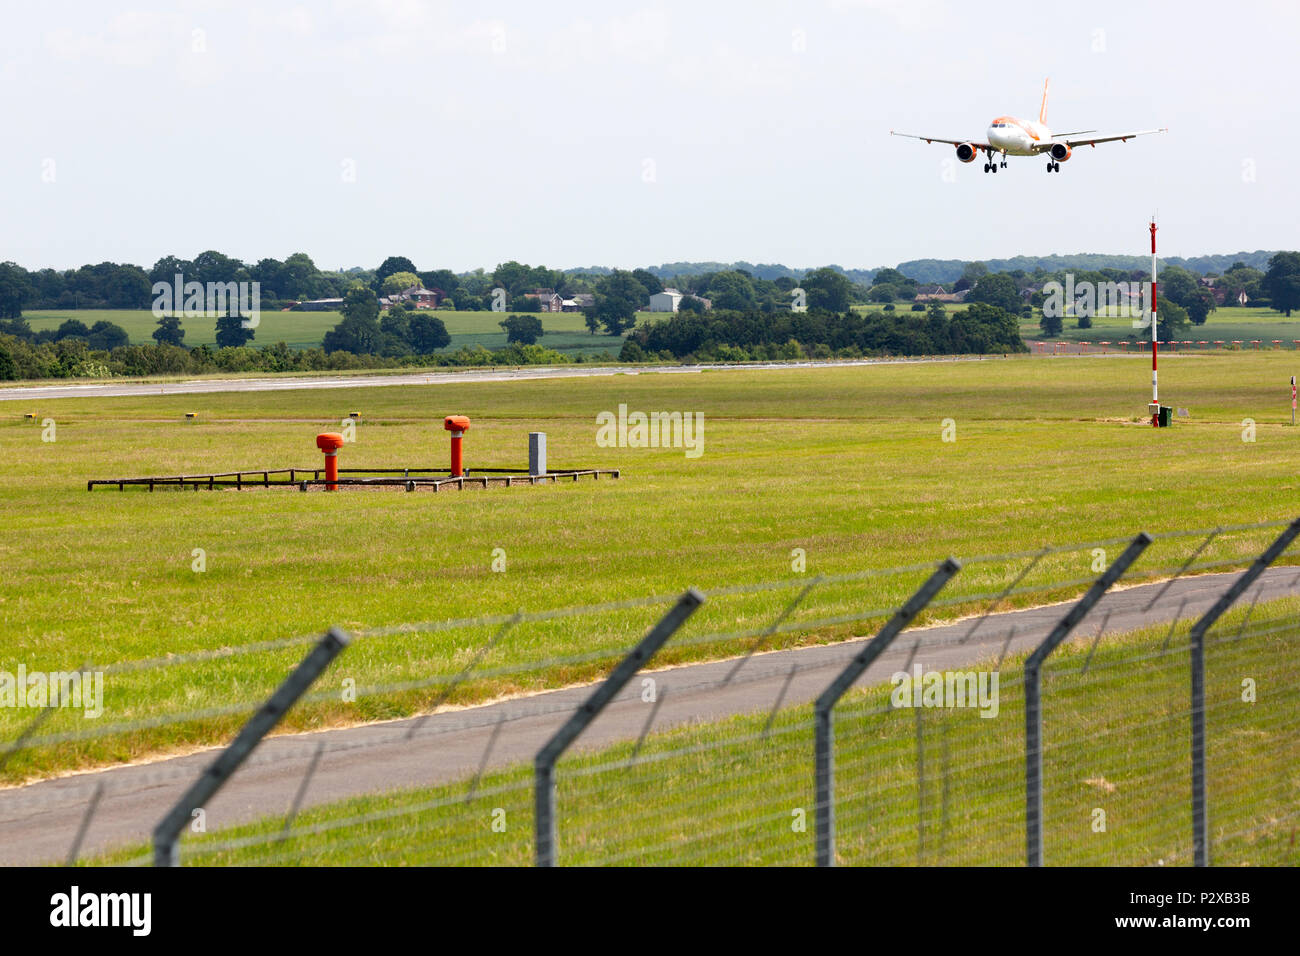 A commercial jet airliner landing at a large city airport, with barbed wires security fence, and airport landing instruments. Stock Photo